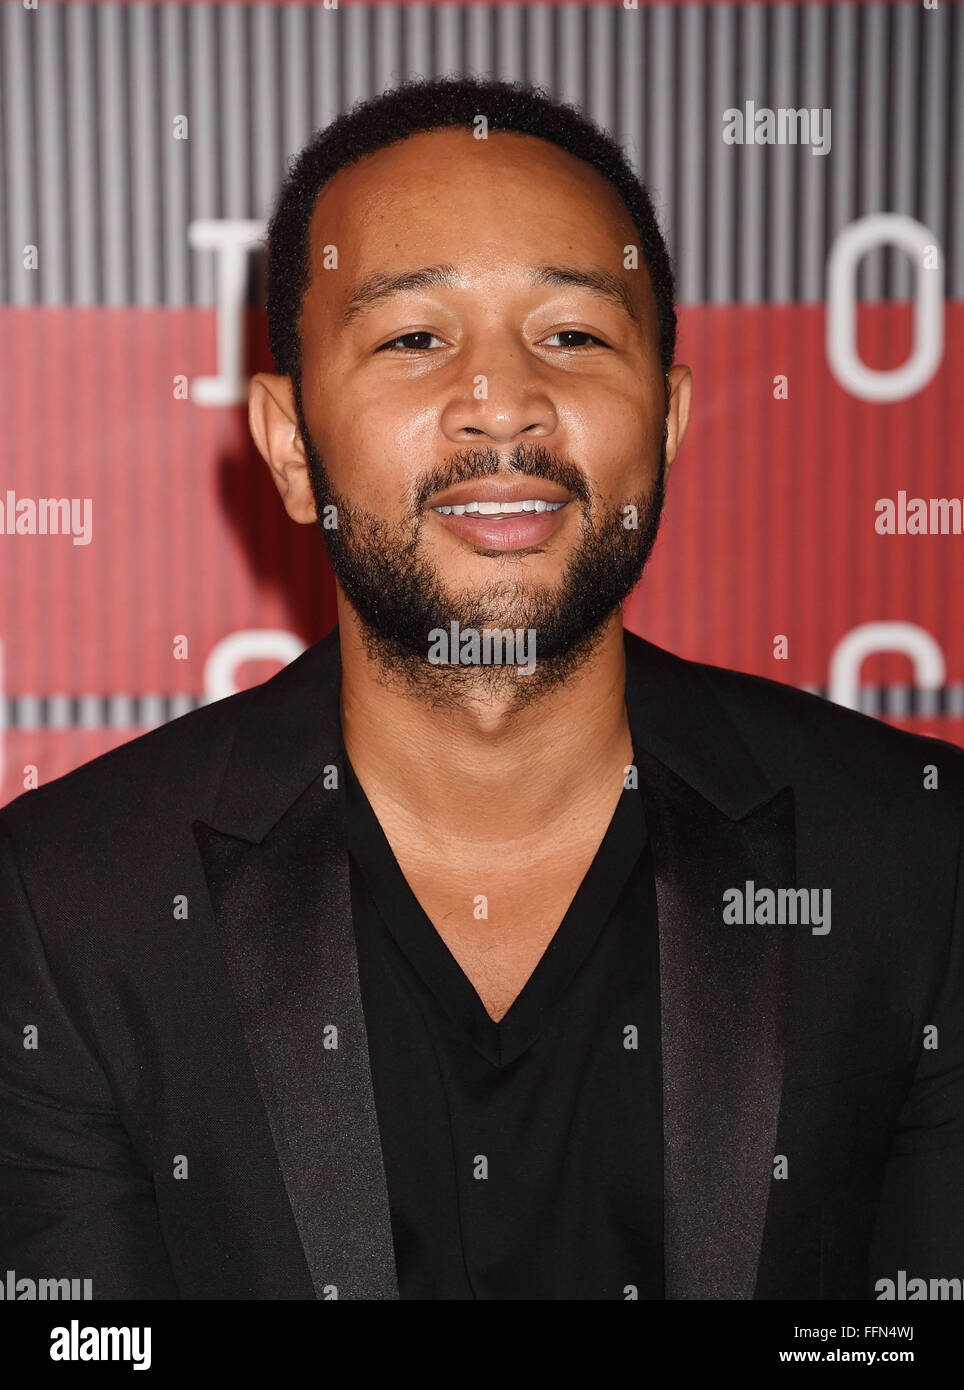 JOHN LEGEND arrives at the 2015 MTV Video Music Awards at Microsoft Theater on August 30, 2015 in Los Angeles, California., Stock Photo